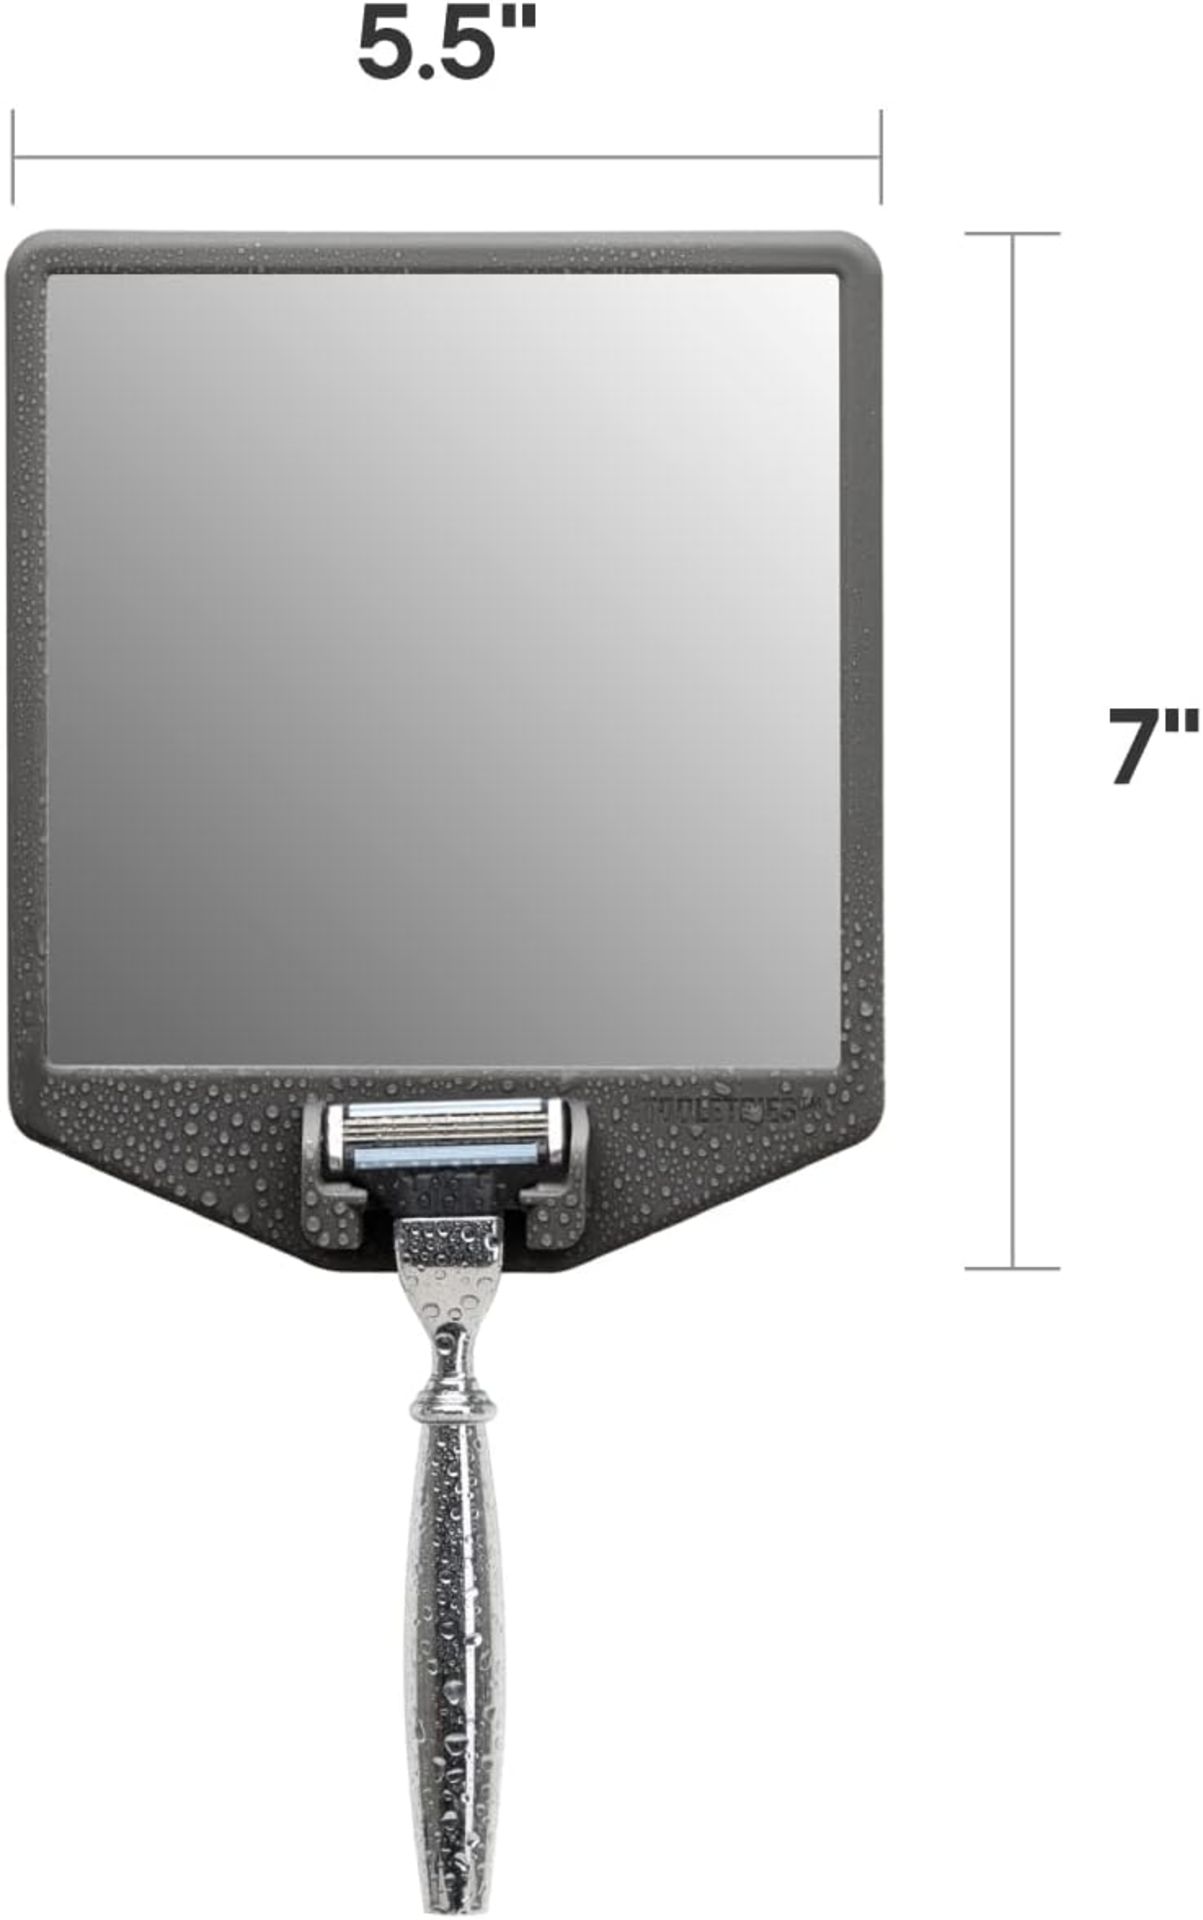 Tooletries The Joseph Mirror And Razor Holder Set, Charcoal x24. Est Retail Value £360 - Image 7 of 7